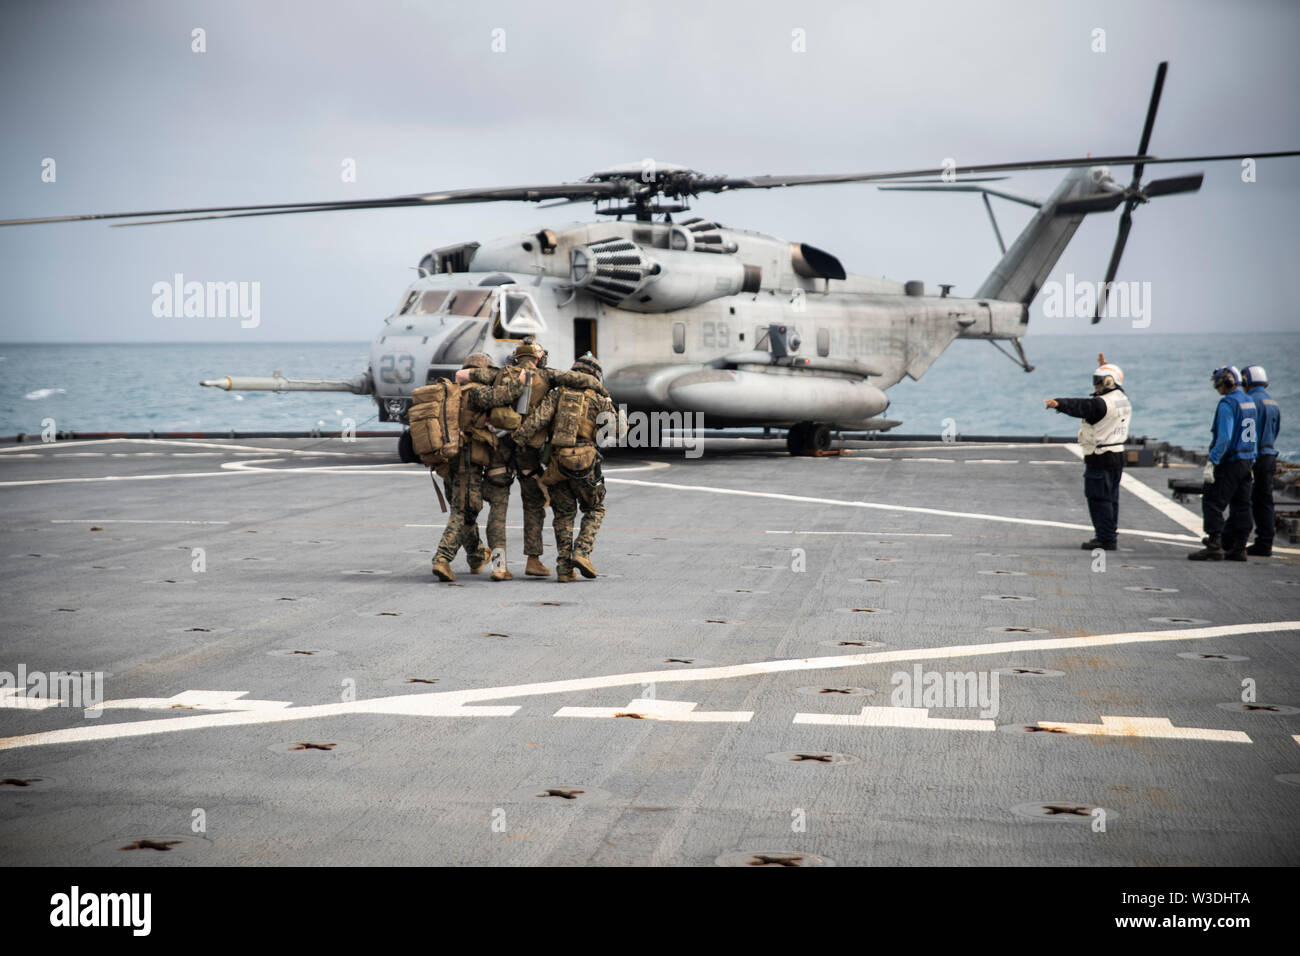 Force Reconnaissance Marines with the 31st Marine Expeditionary Unit Maritime Raid Force assist a simulated casualty to a CH-53E Super Stallion helicopter during a visit, board, search and seizure exercise aboard the dock landing ship USS Ashland (LSD 48), underway in the Coral Sea, July 7, 2019. Ashland, part of the Wasp Amphibious Ready Group, with embarked 31st MEU, is operating in the Indo-Pacific region to enhance interoperability with partners and serve as a ready-response force for any type of contingency, while simultaneously providing a flexible and lethal crisis response force ready Stock Photo